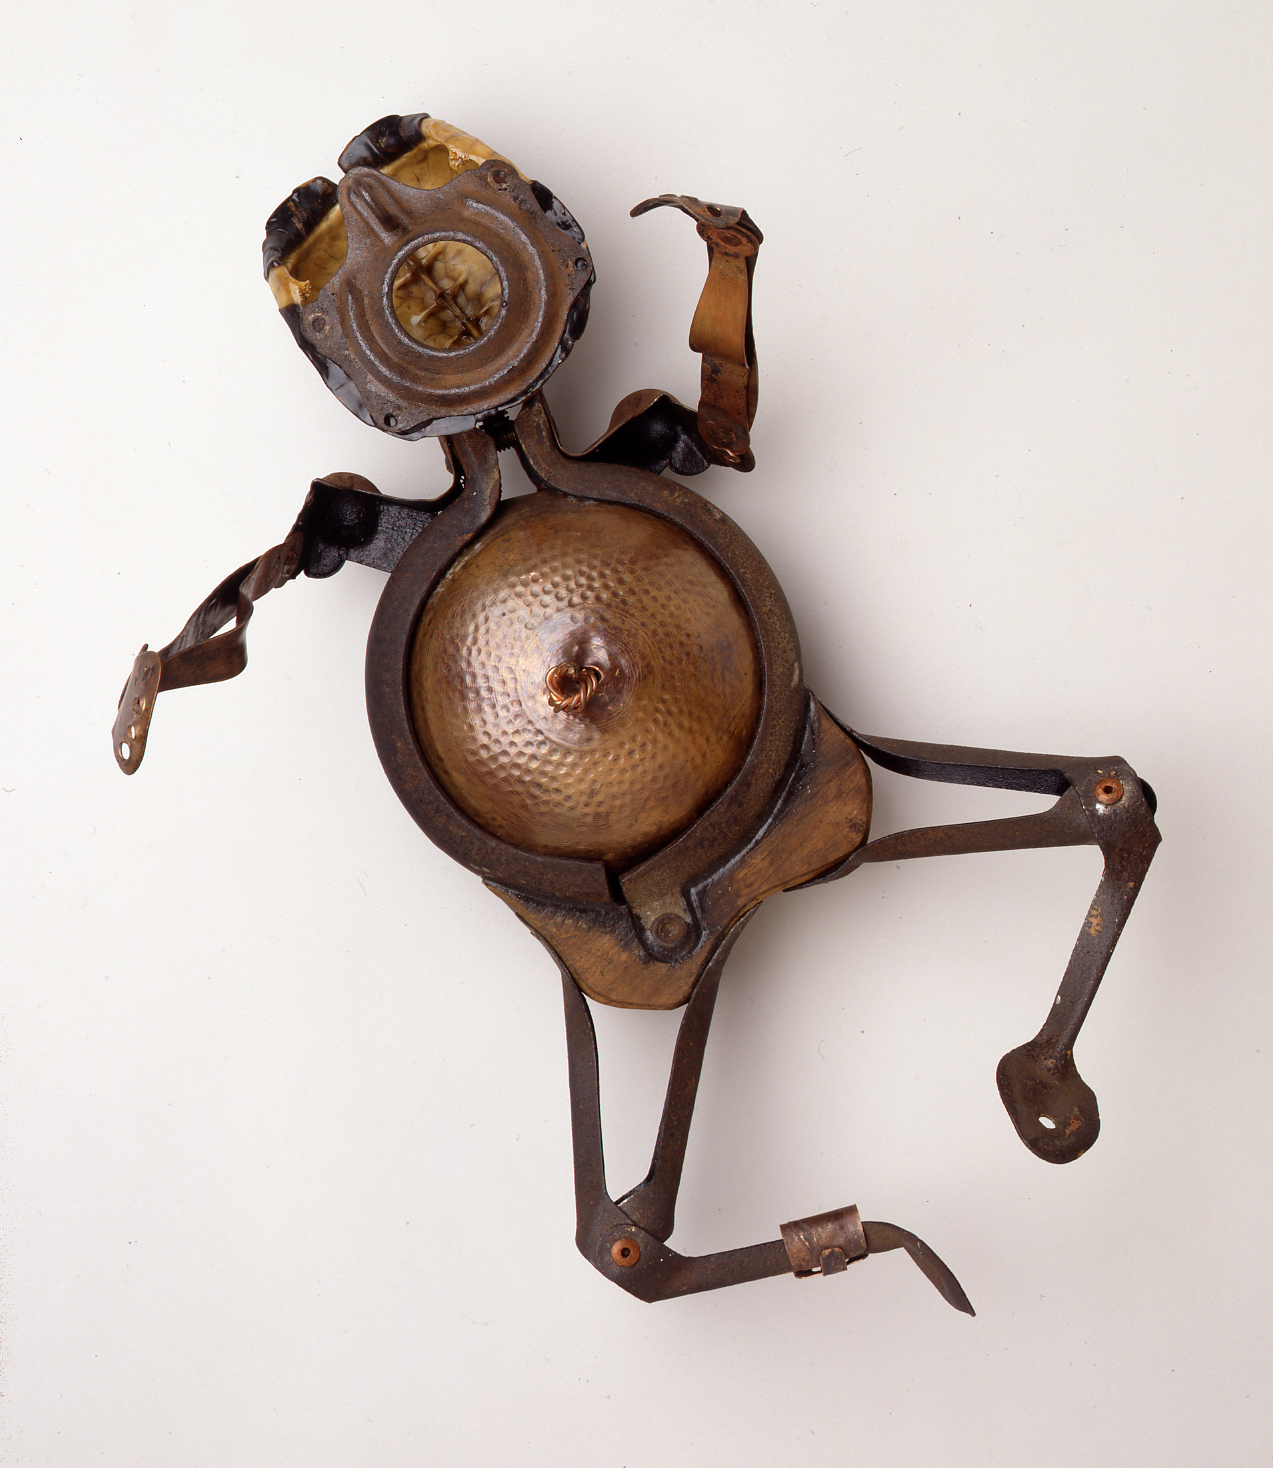 found objects, mixed media, repurposed, assemblage, figurative